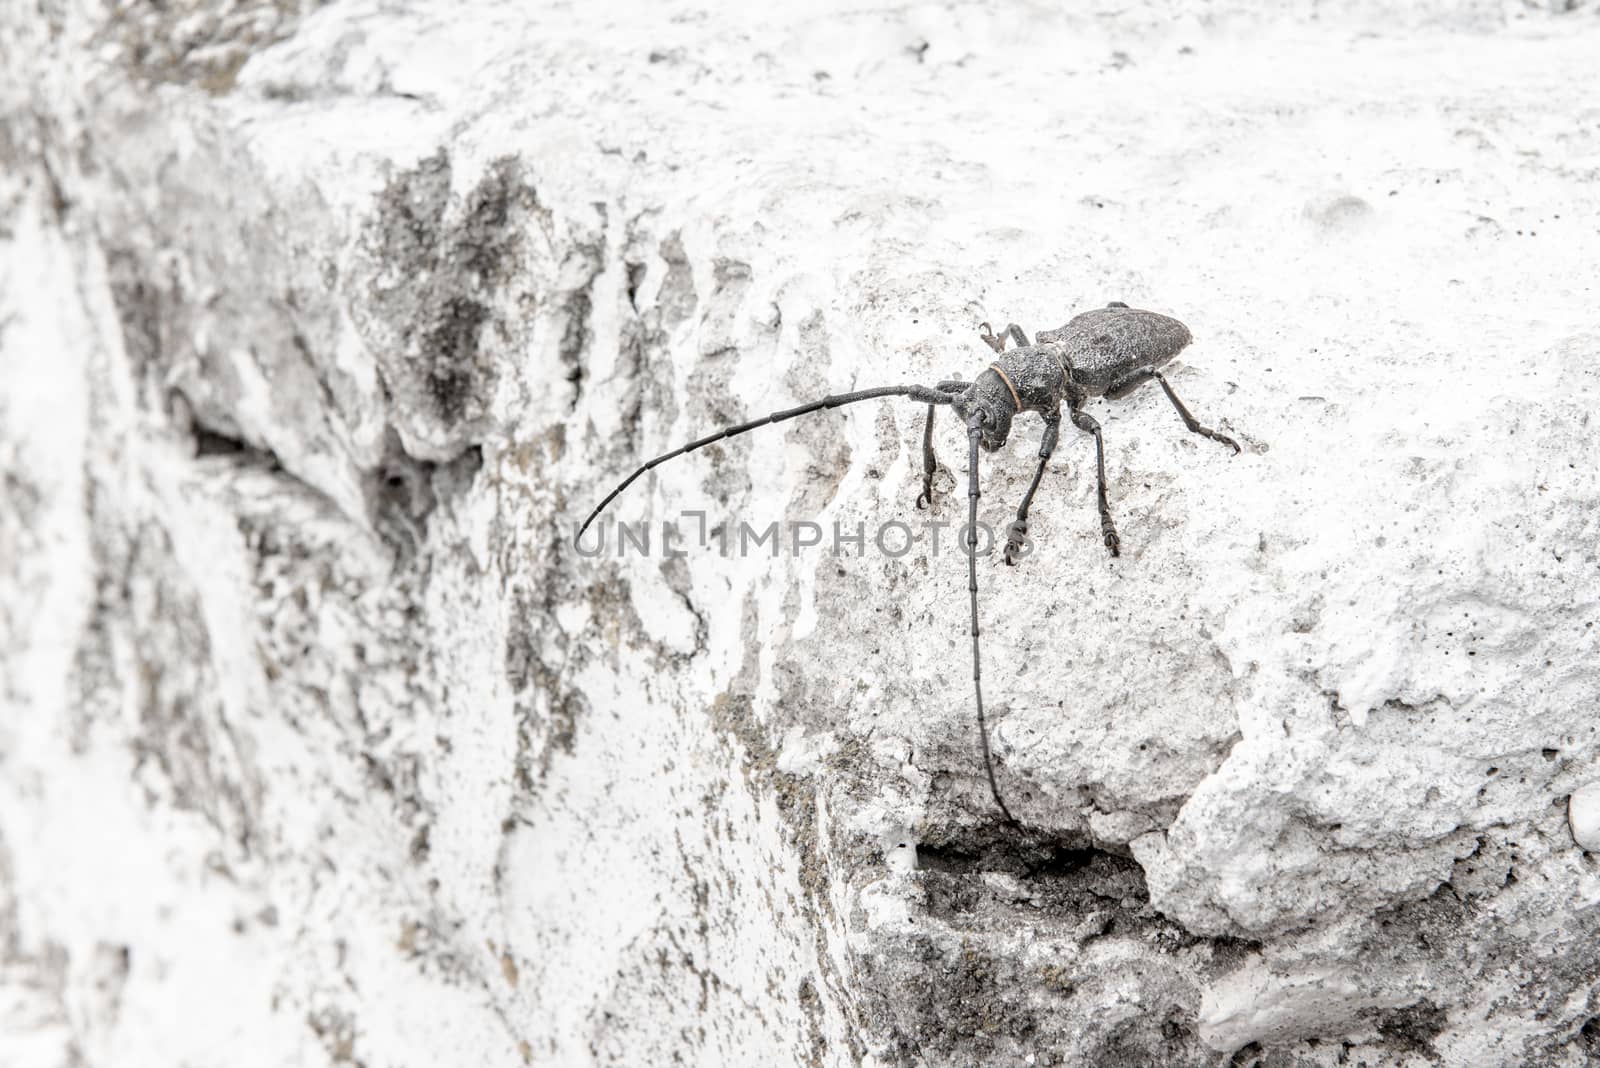 The Pine sawyer beetle Monochamus galloprovincialis from family Cerambycidae on a white background.